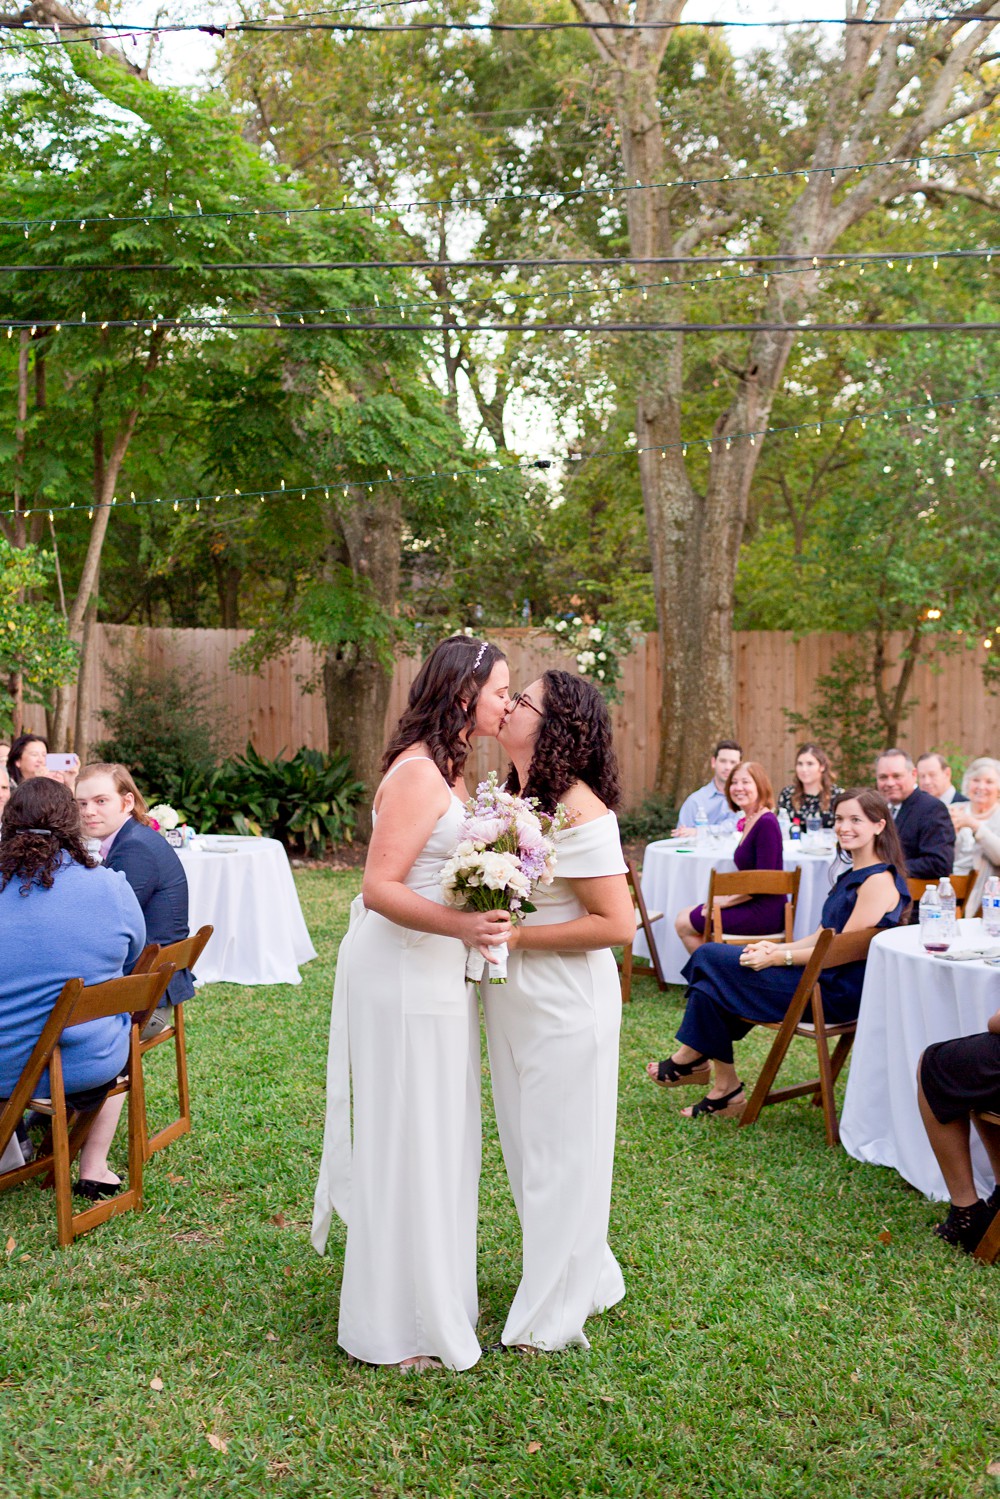 Brides kissing in the aisle during livestreamed wedding ceremony